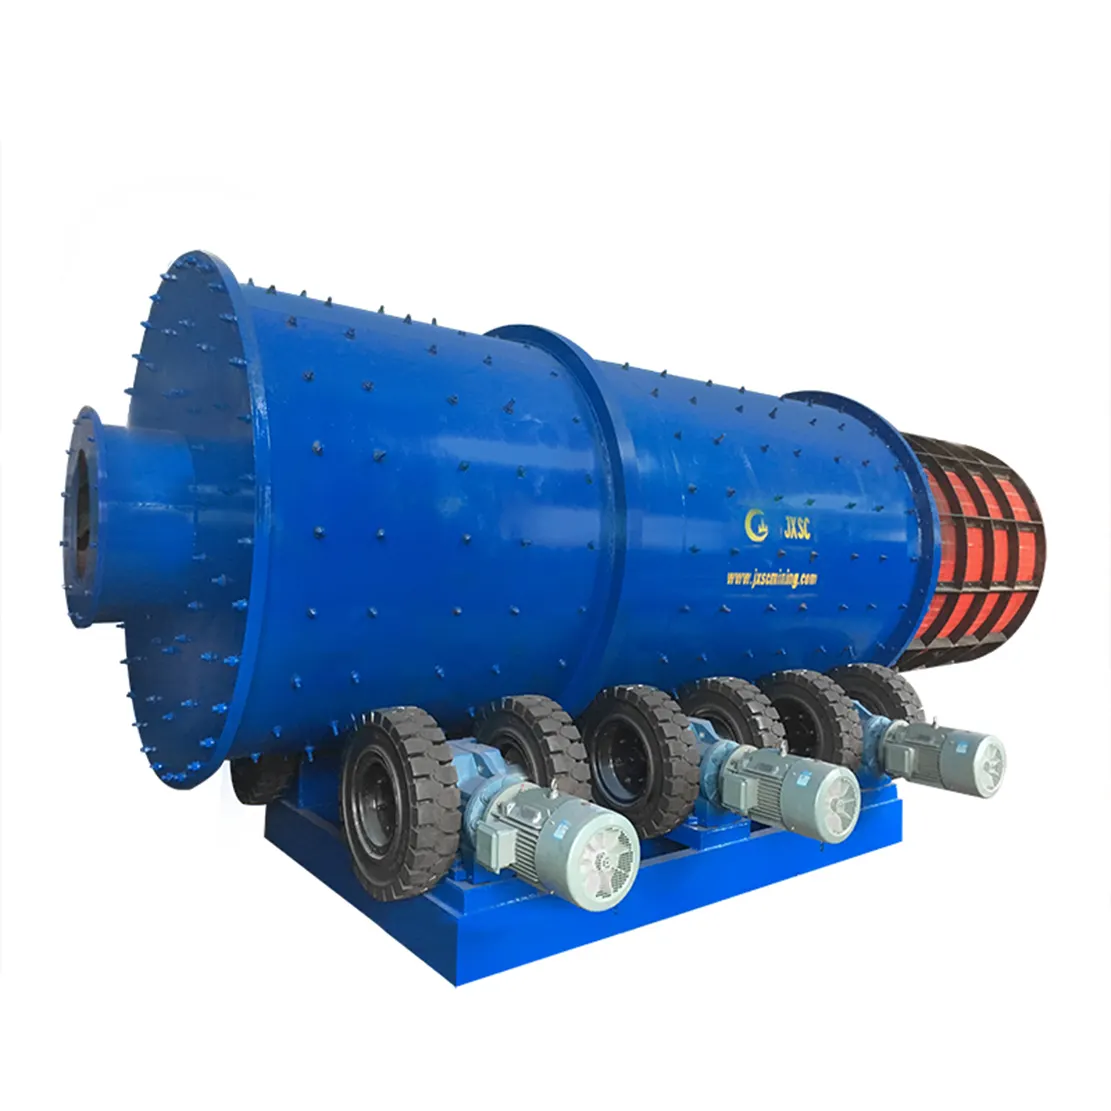 200TPH Large Capacity Diamond Recovery Plant Alluvial Gold Mining Washing Process Equipment Price